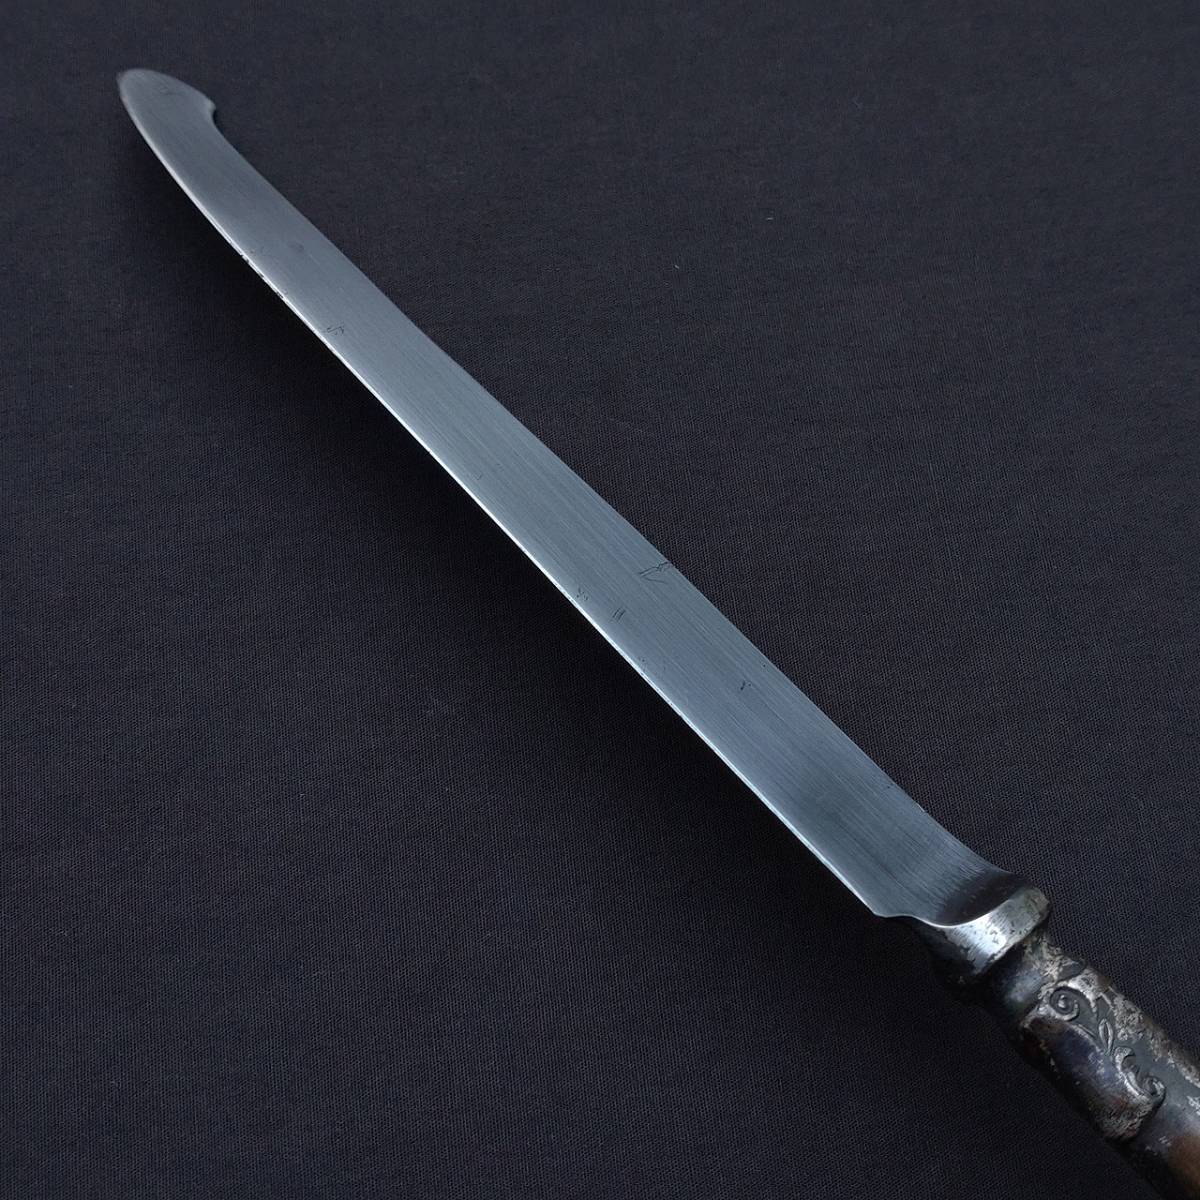  table knife steak knife cutlery J.K.STAINLESS blade length approximately 140. total length approximately 265. engraving pattern European style [4603]